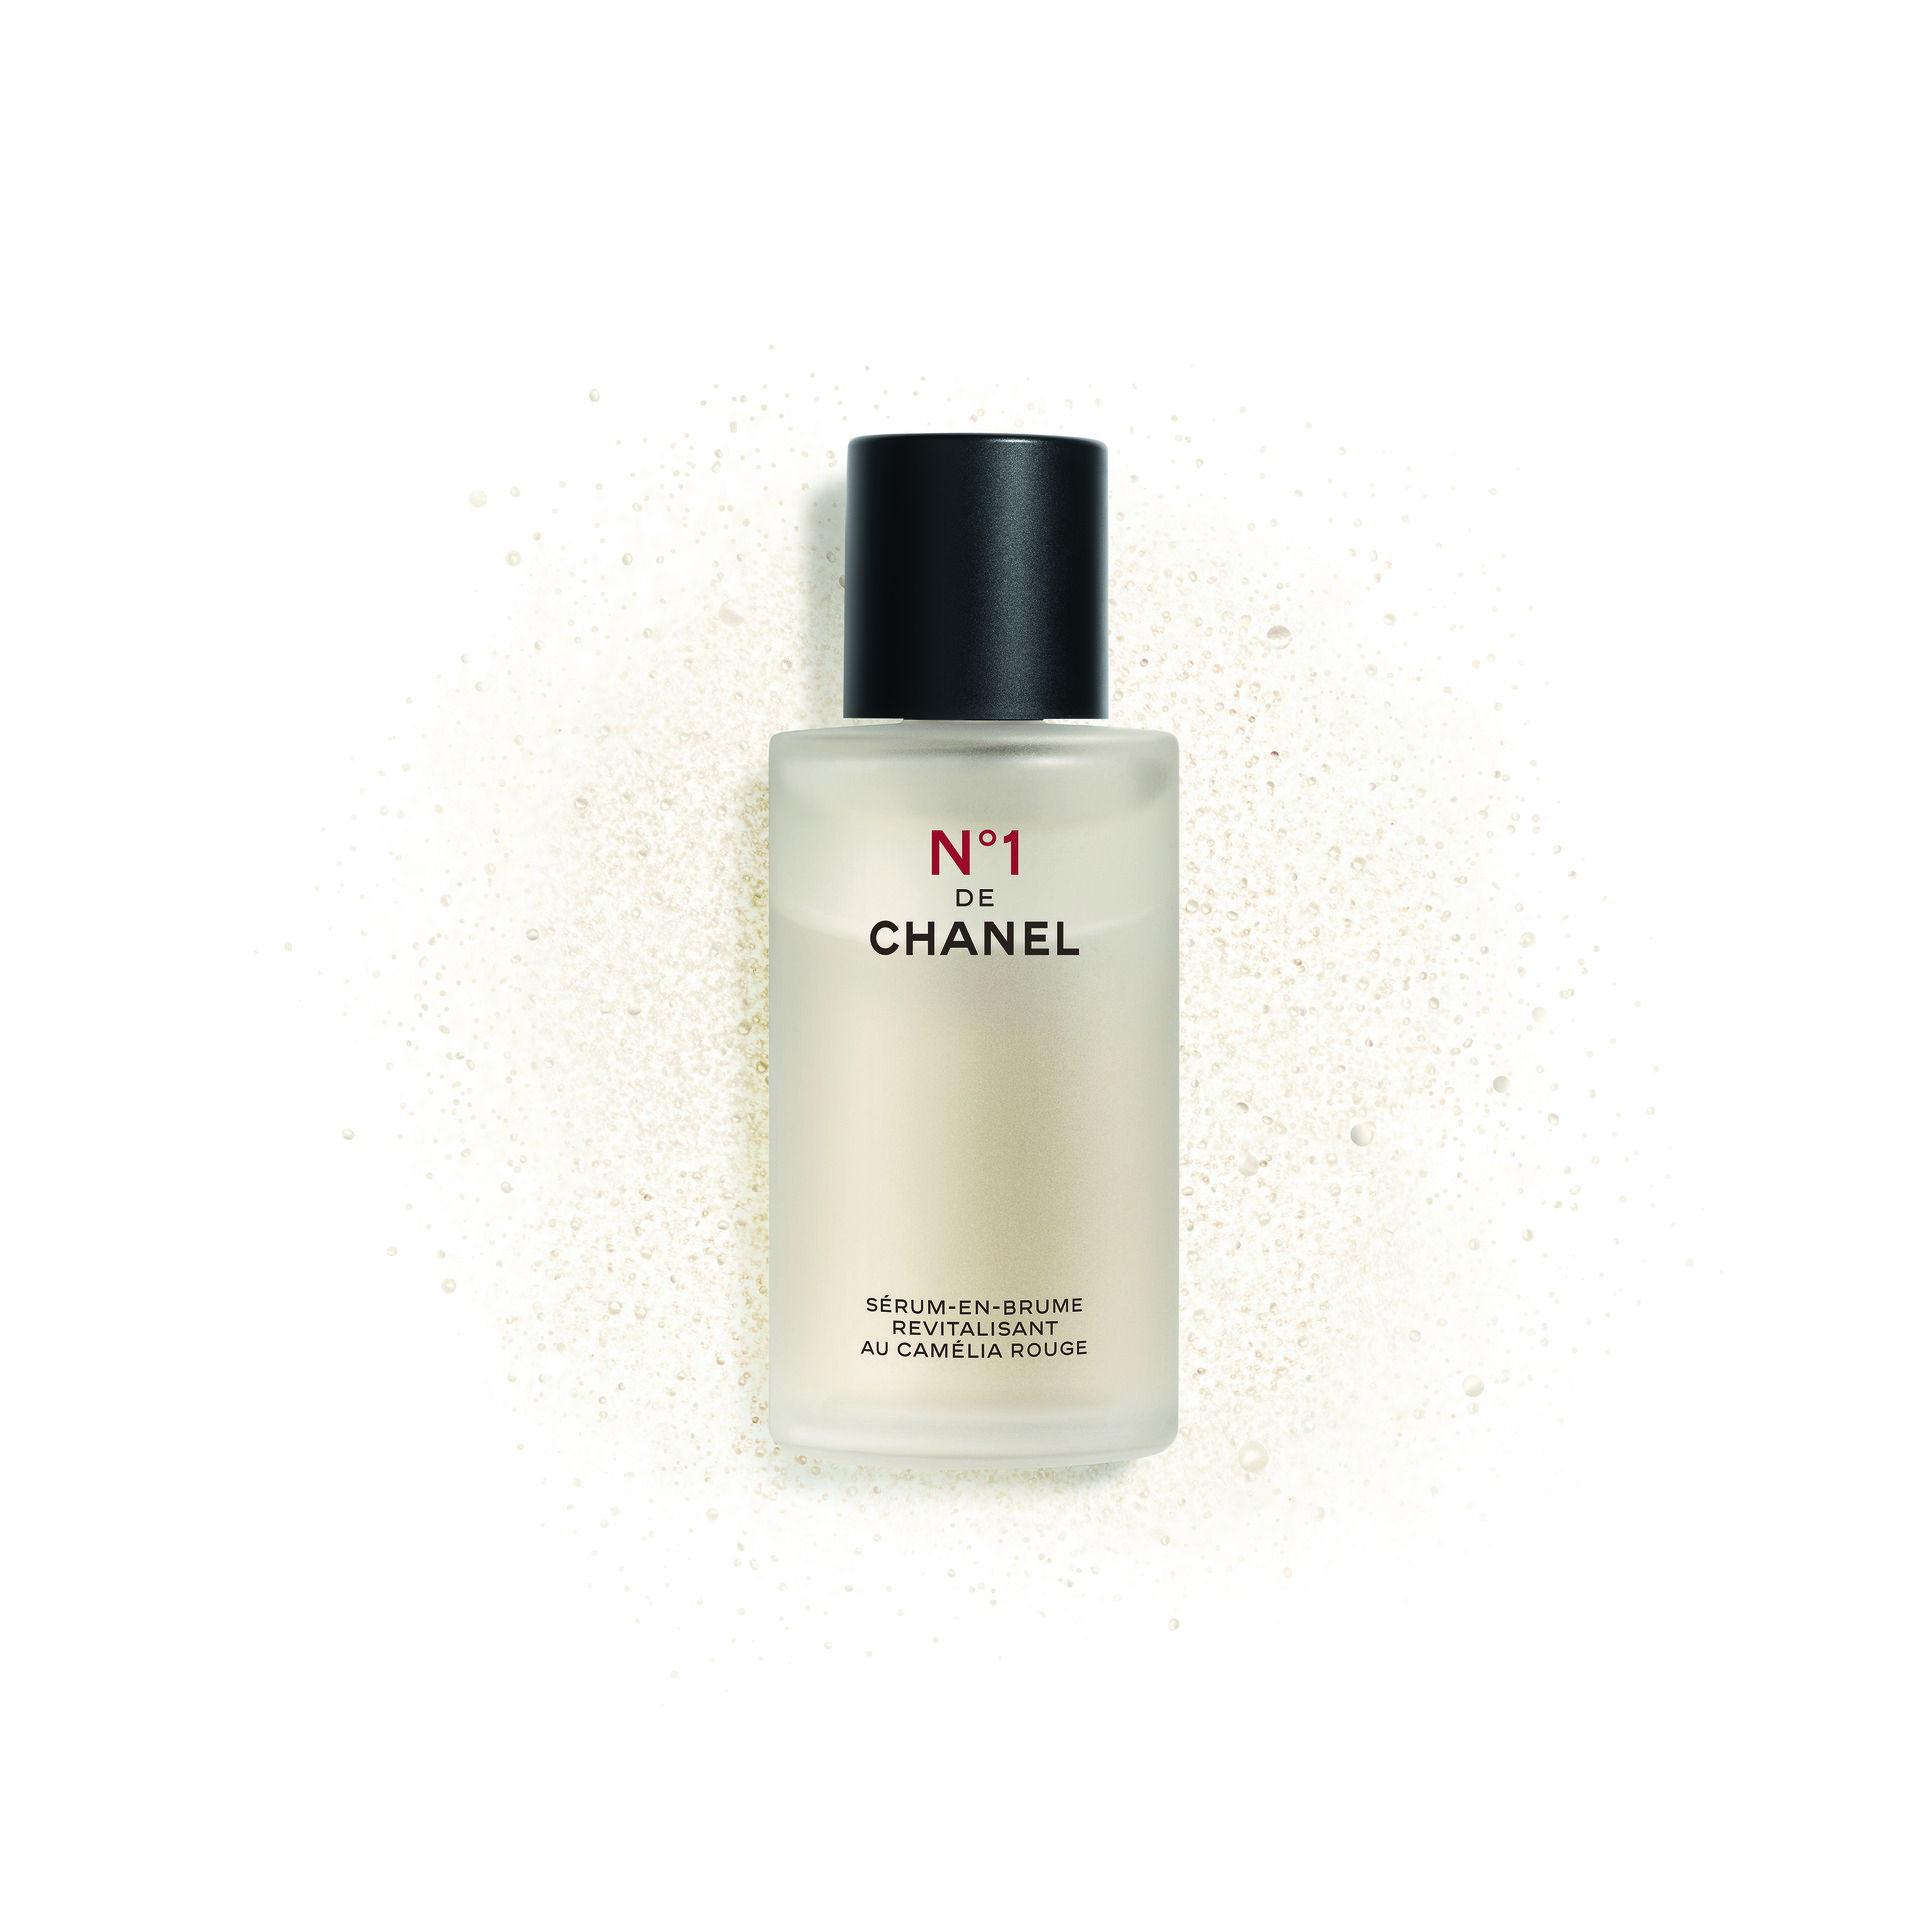 Chanel Review > Le Blanc Huile (Healthy Light Creator Oil/ Face oil)